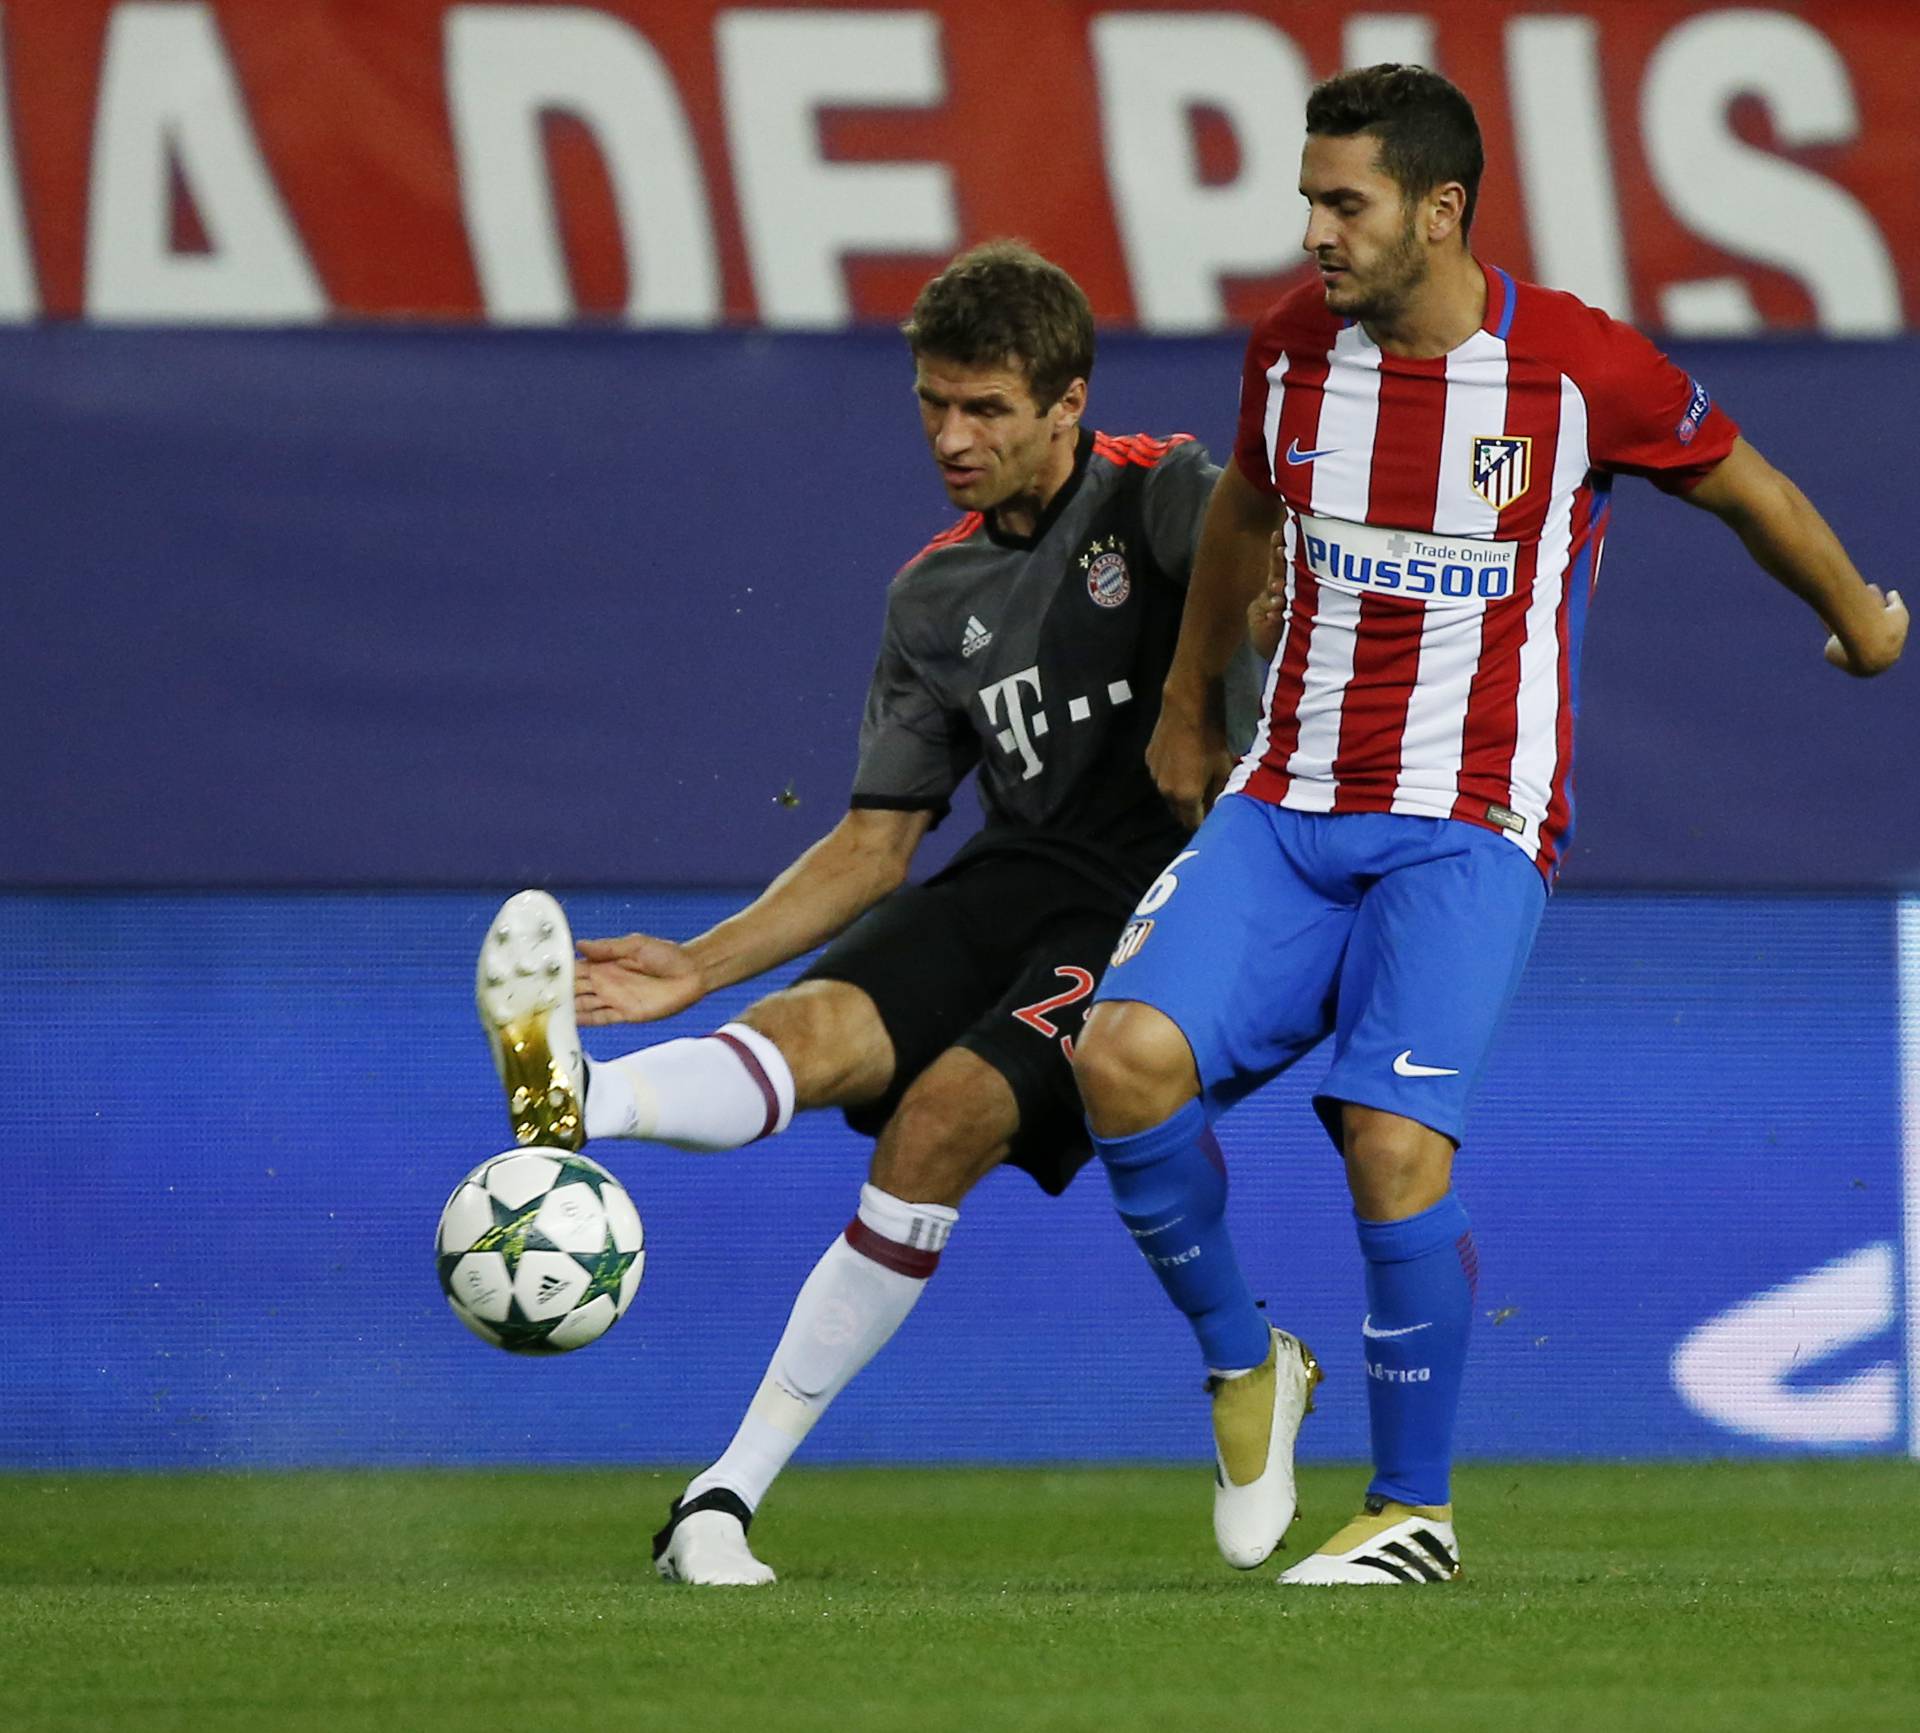 Atletico Madrid v Bayern Munich - UEFA Champions League Group Stage - Group D